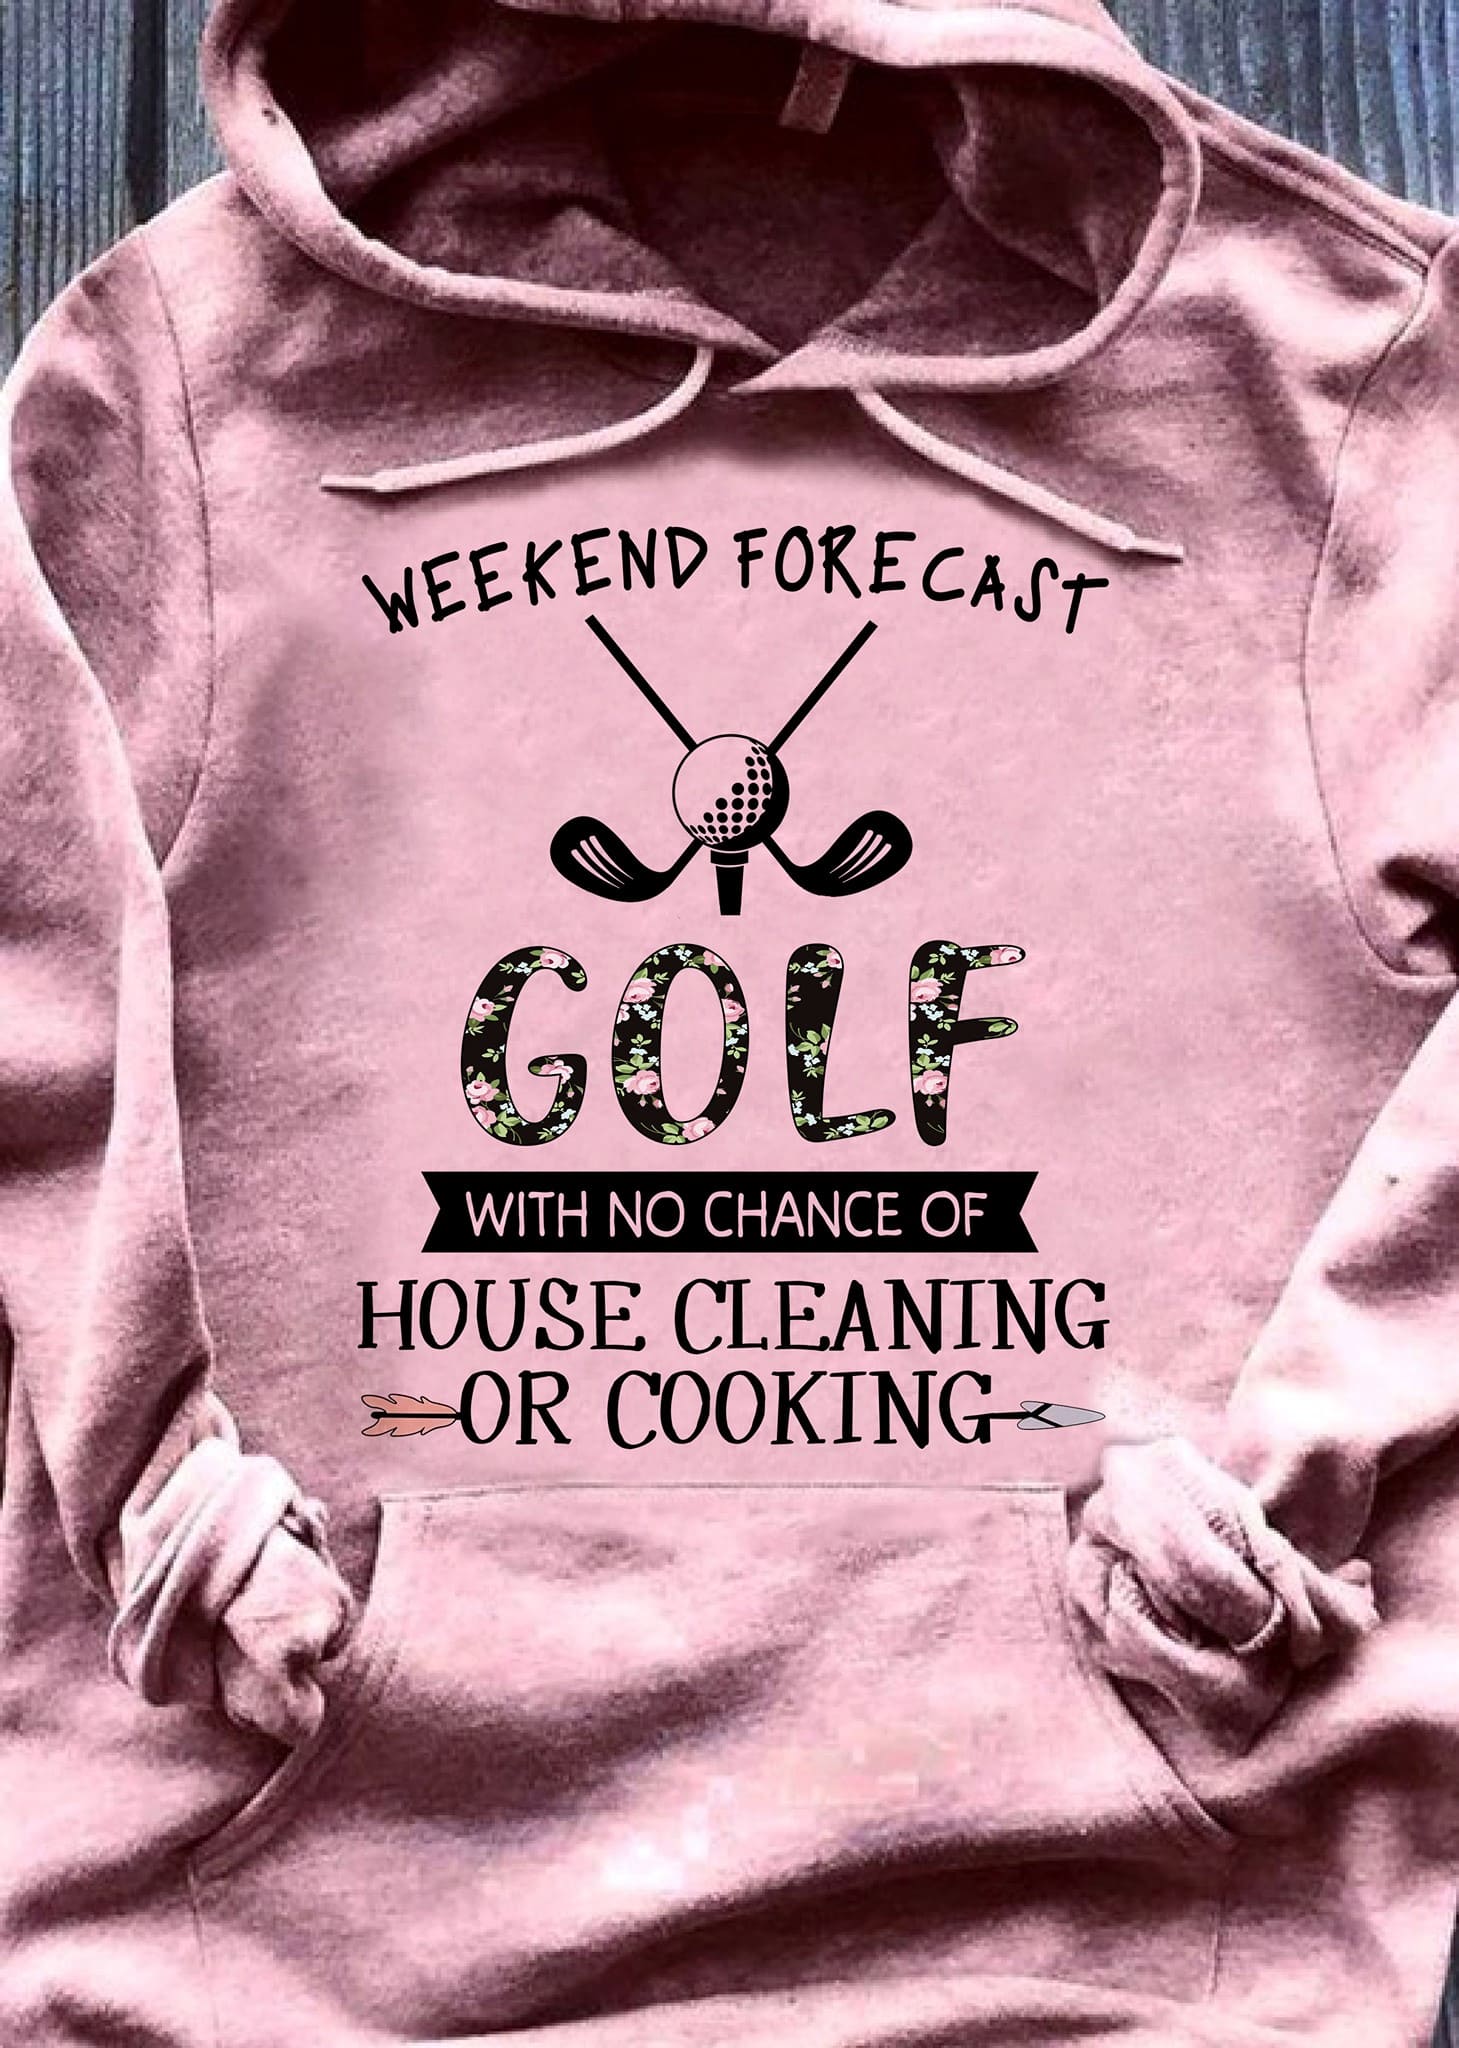 Golf Woman - Weekend forecast golf with no chance of house cleaning or cooking